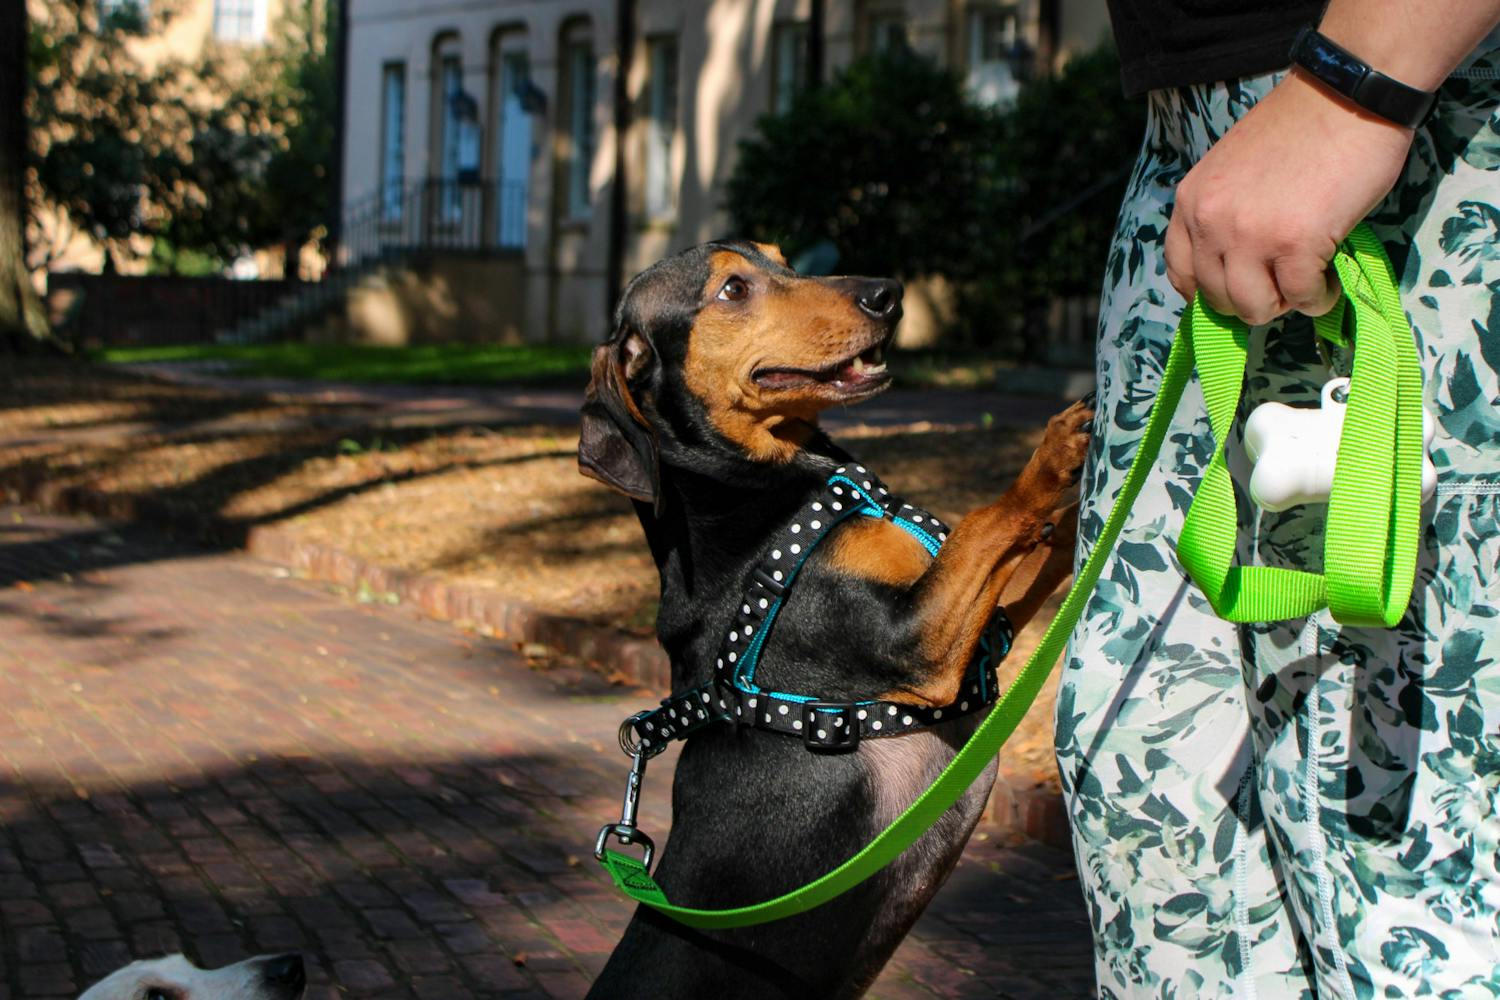 The Dachshunds of Columbia dog-walking group gathered on 鶹С򽴫ý's Horseshoe for a walk from campus to the S.C. Statehouse during one of their many social events this year. The dog walk held on Sept. 17, 2022, saw a variety of small dachshunds walk alongside their owners as the group congregated to socialize and snap pictures of their adorable animals.